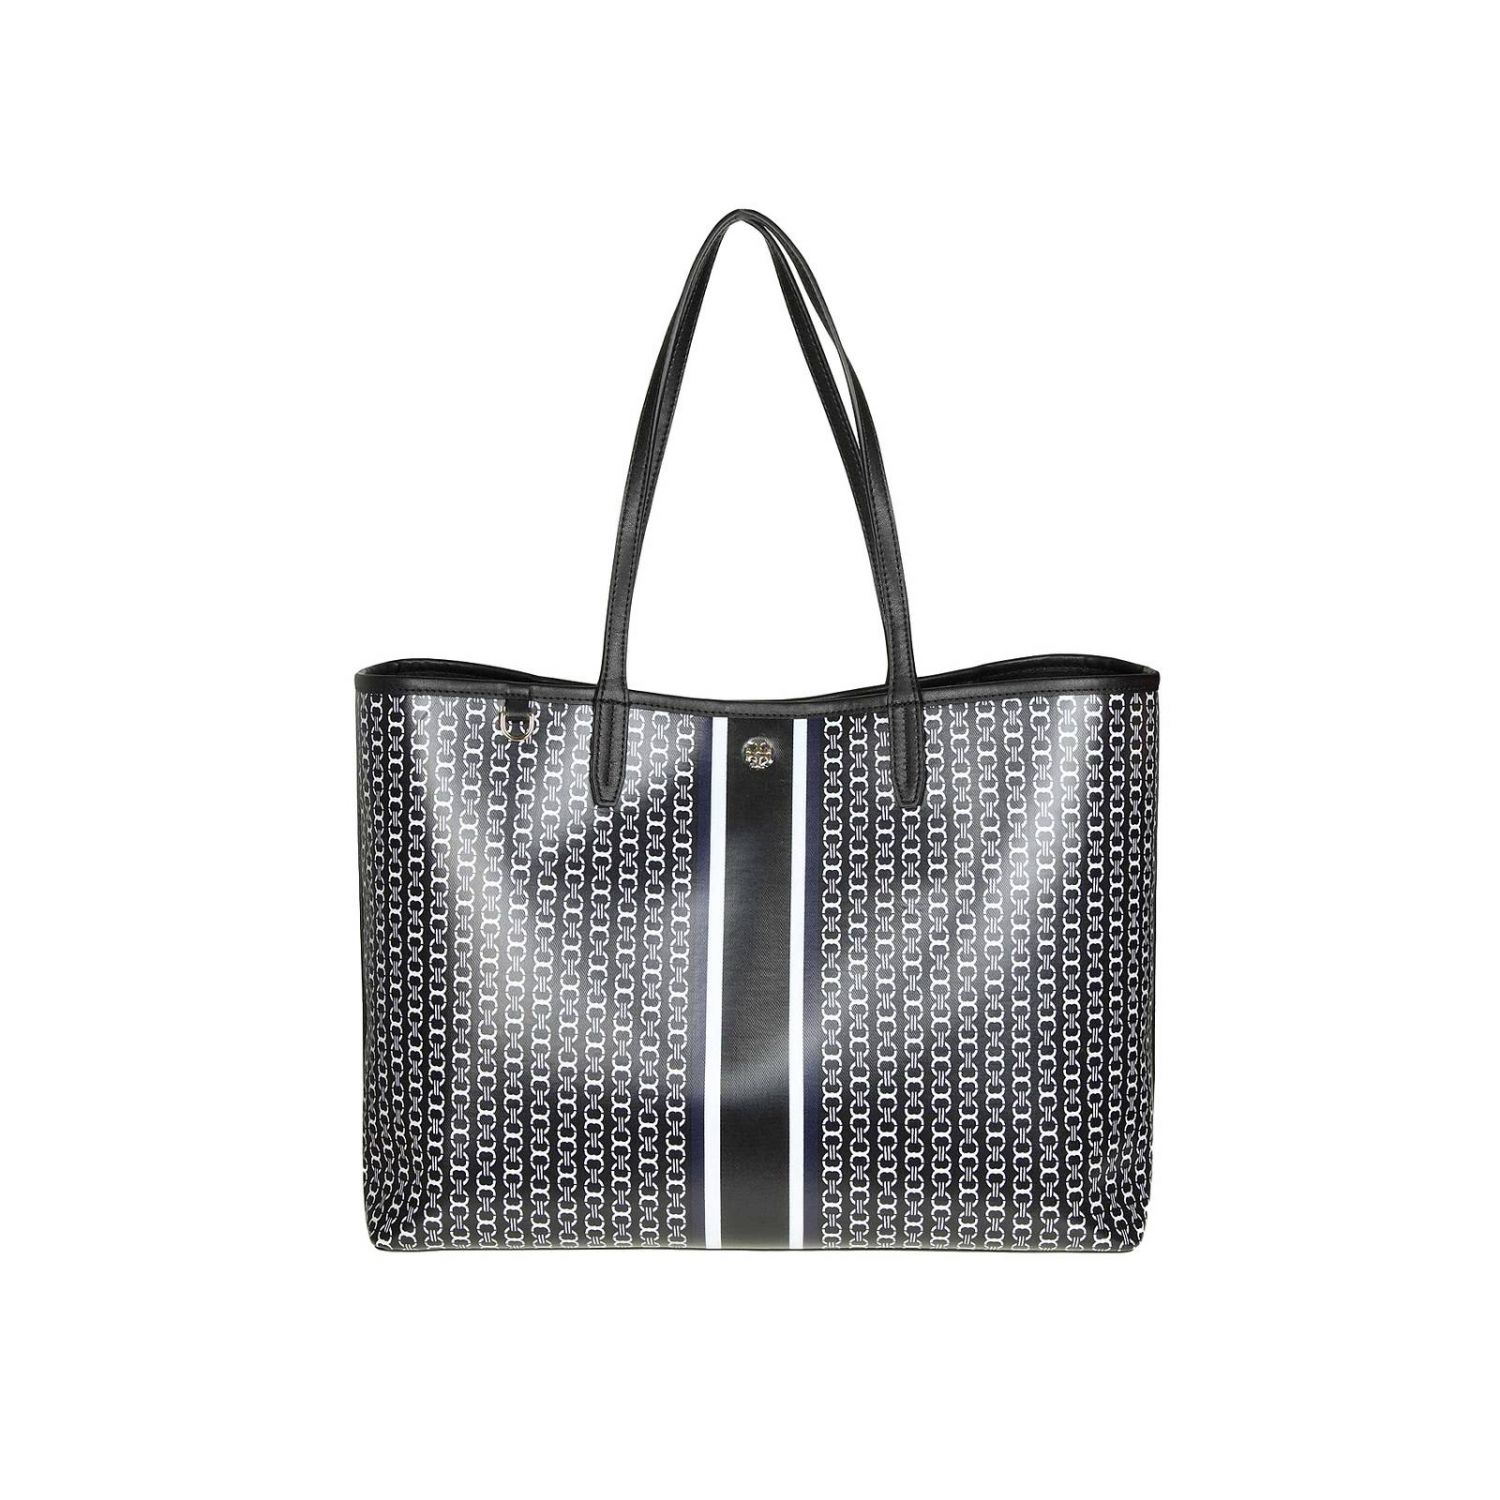 TORY BURCH: tote bags for woman - Black | Tory Burch tote bags 33801 ...